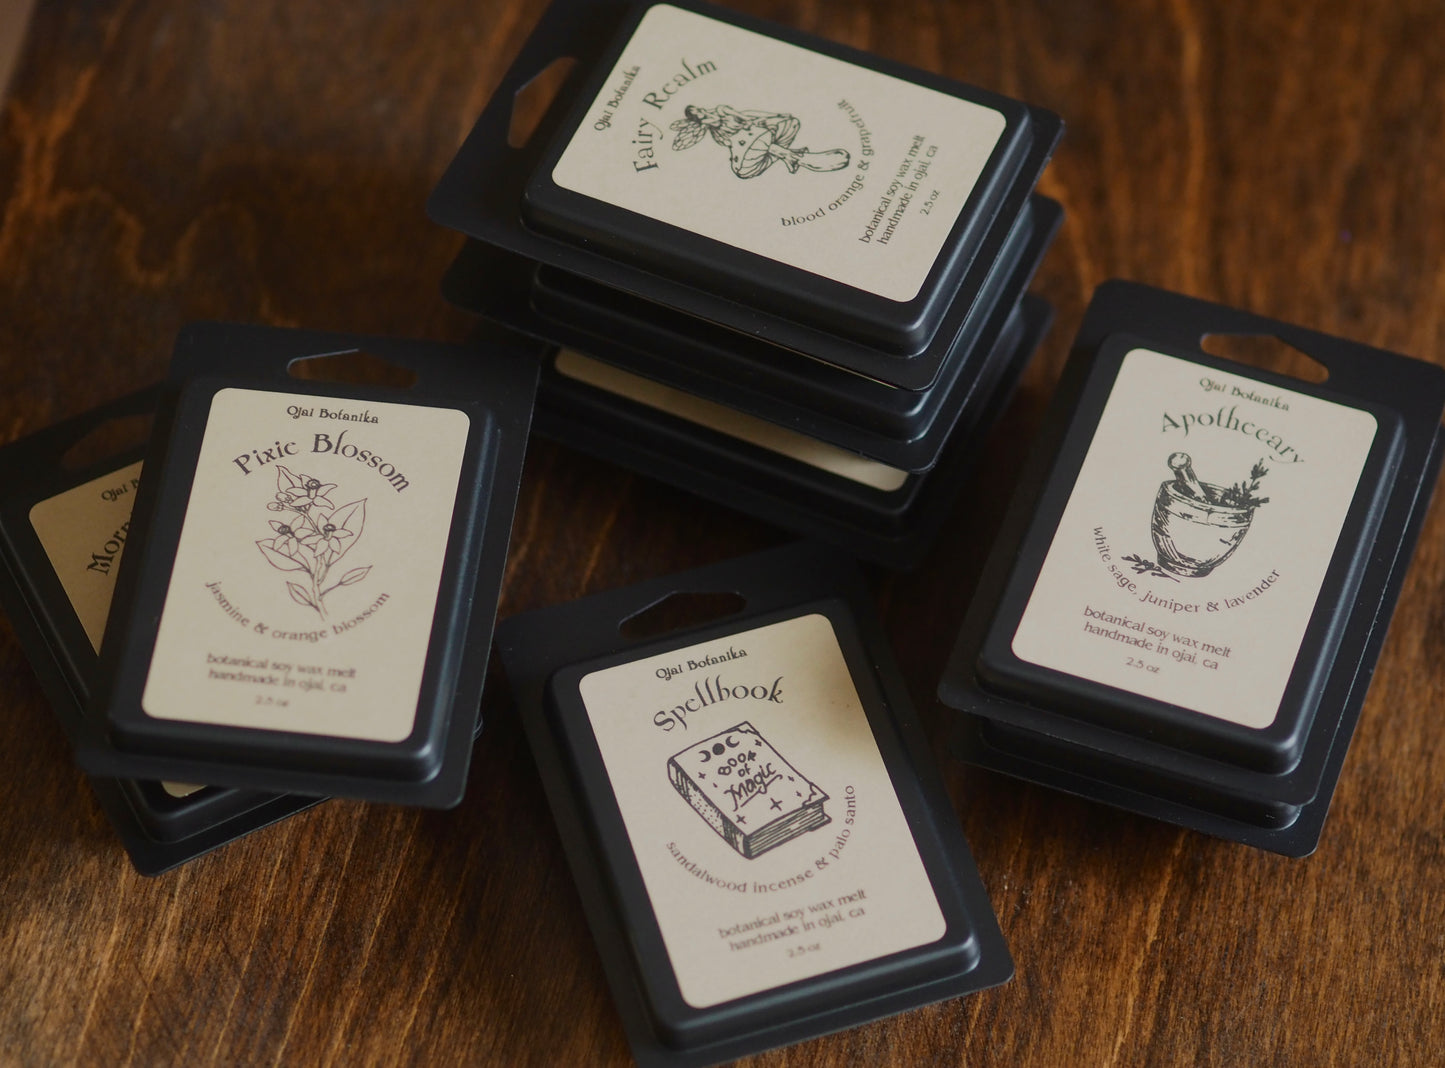 Handmade Botanical Soy Wax Melts - Choose Your Scent